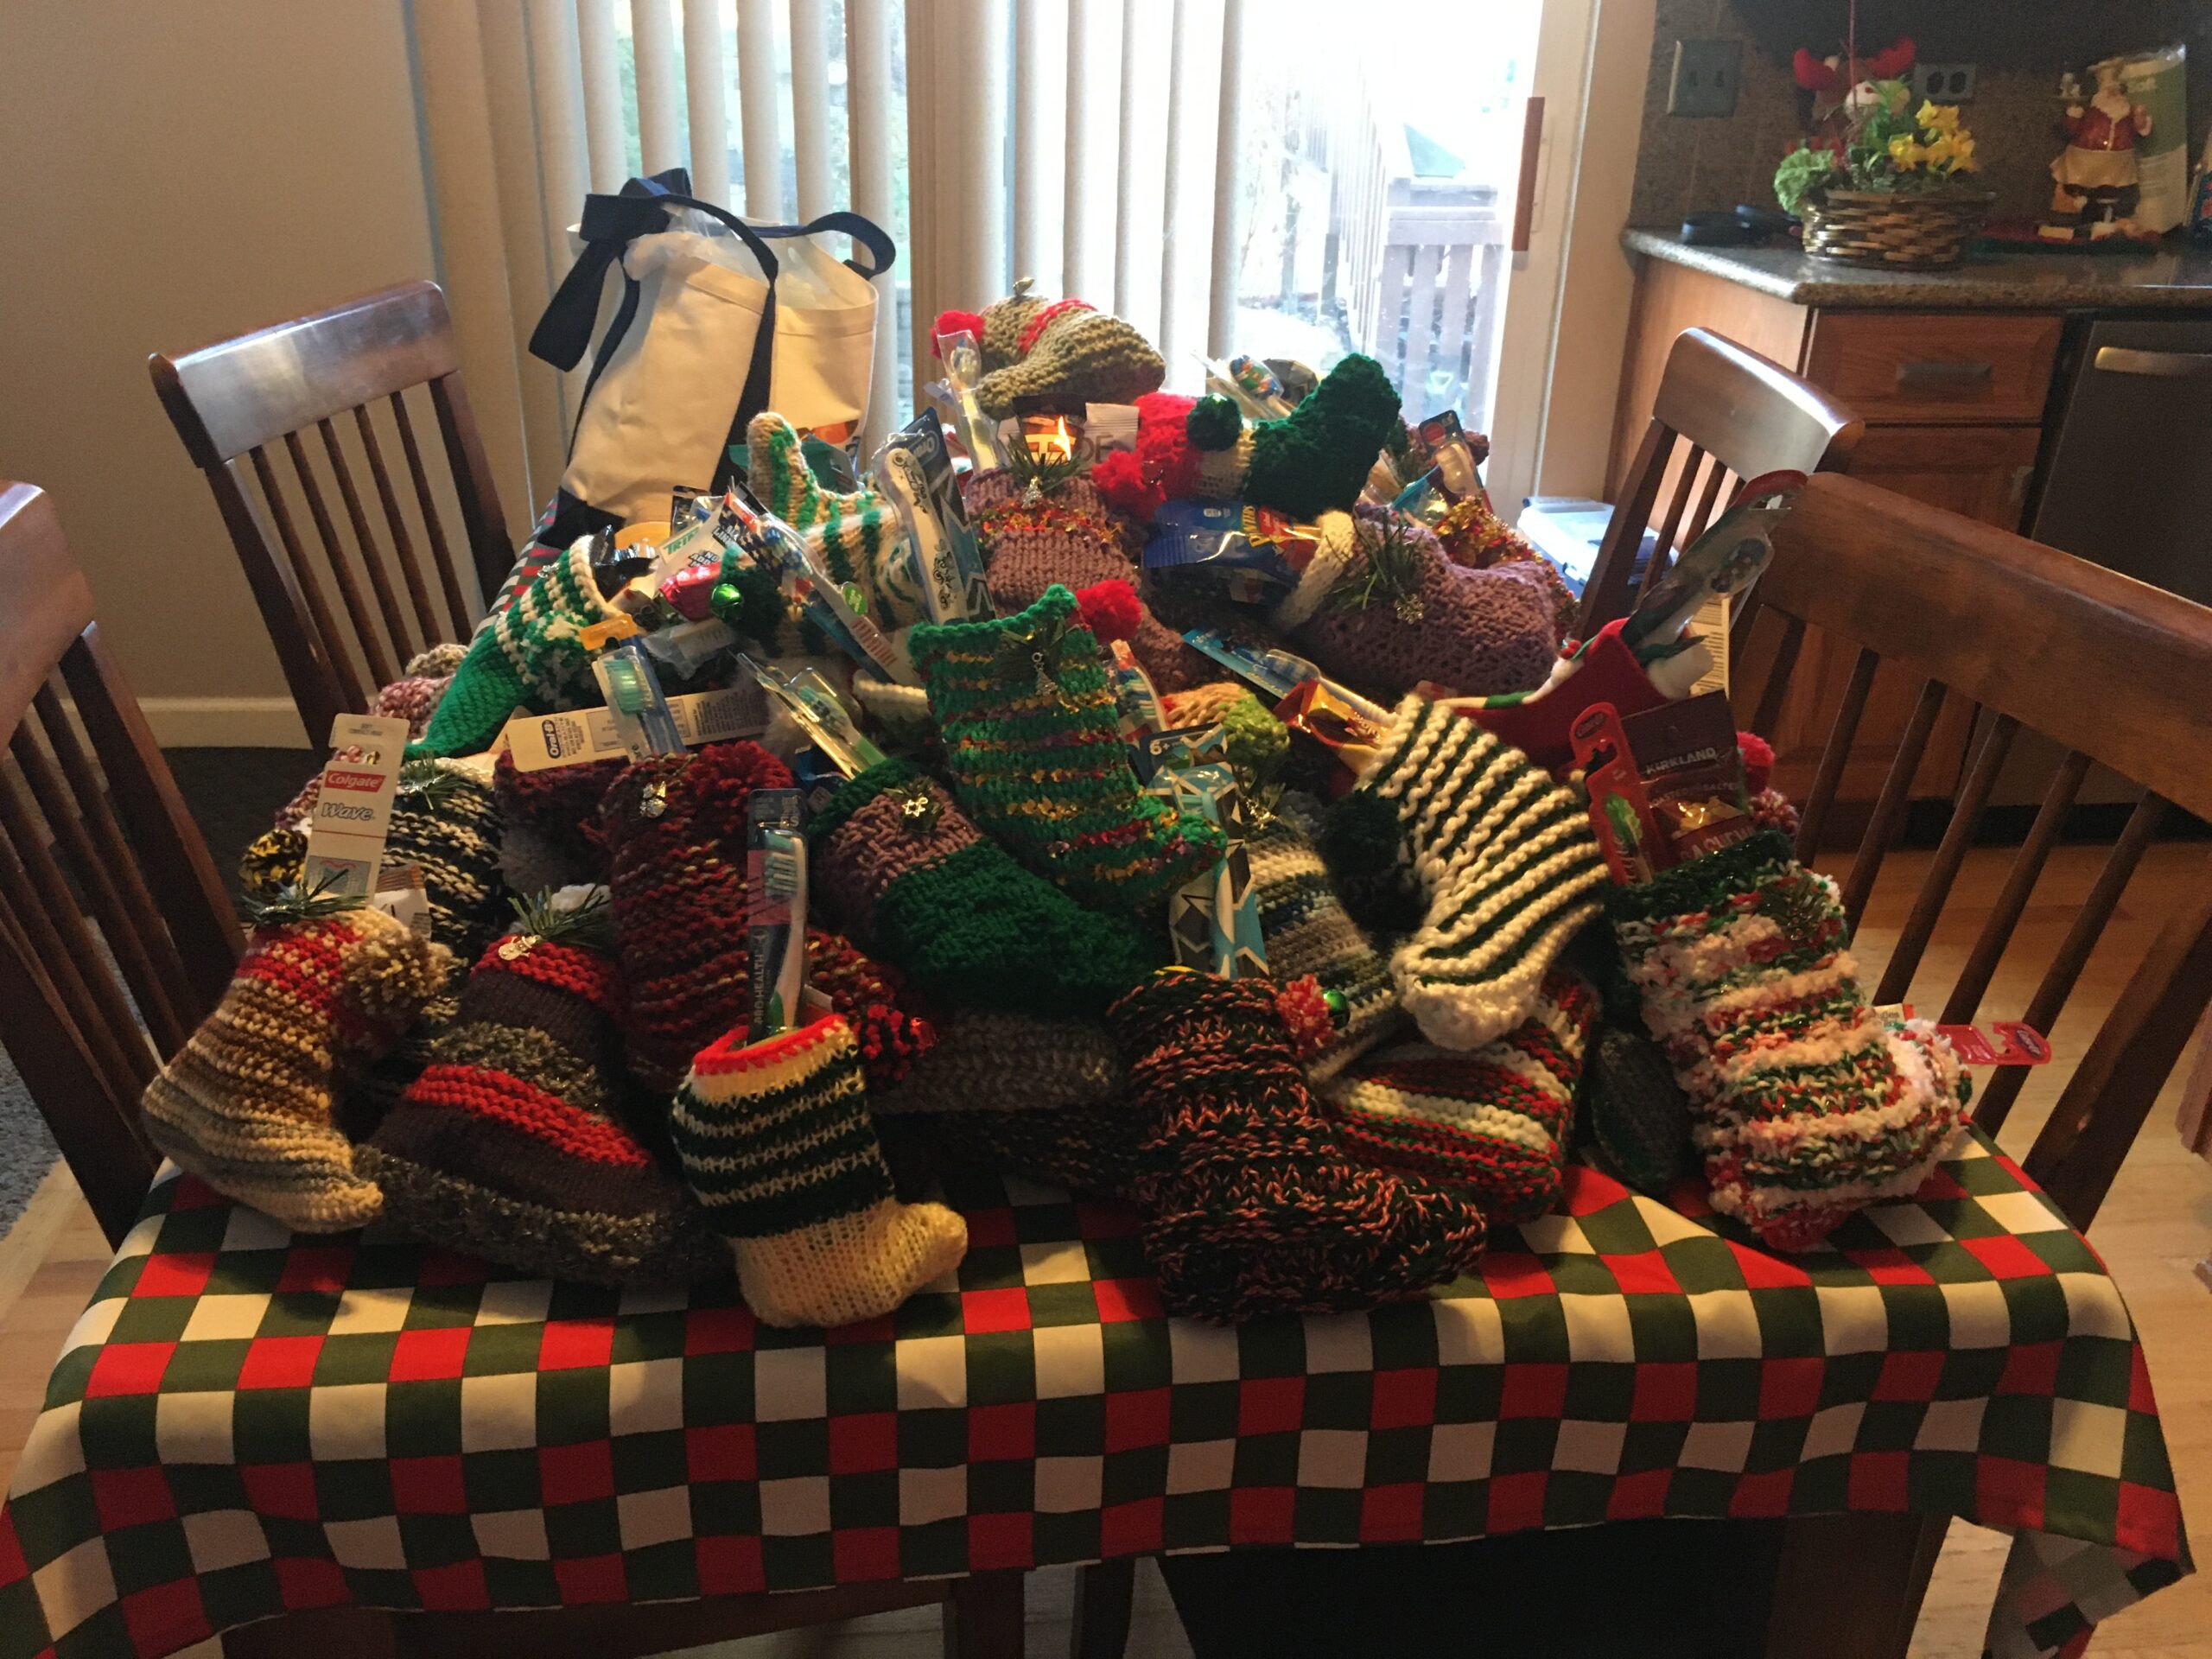 Stocking for Soldiers